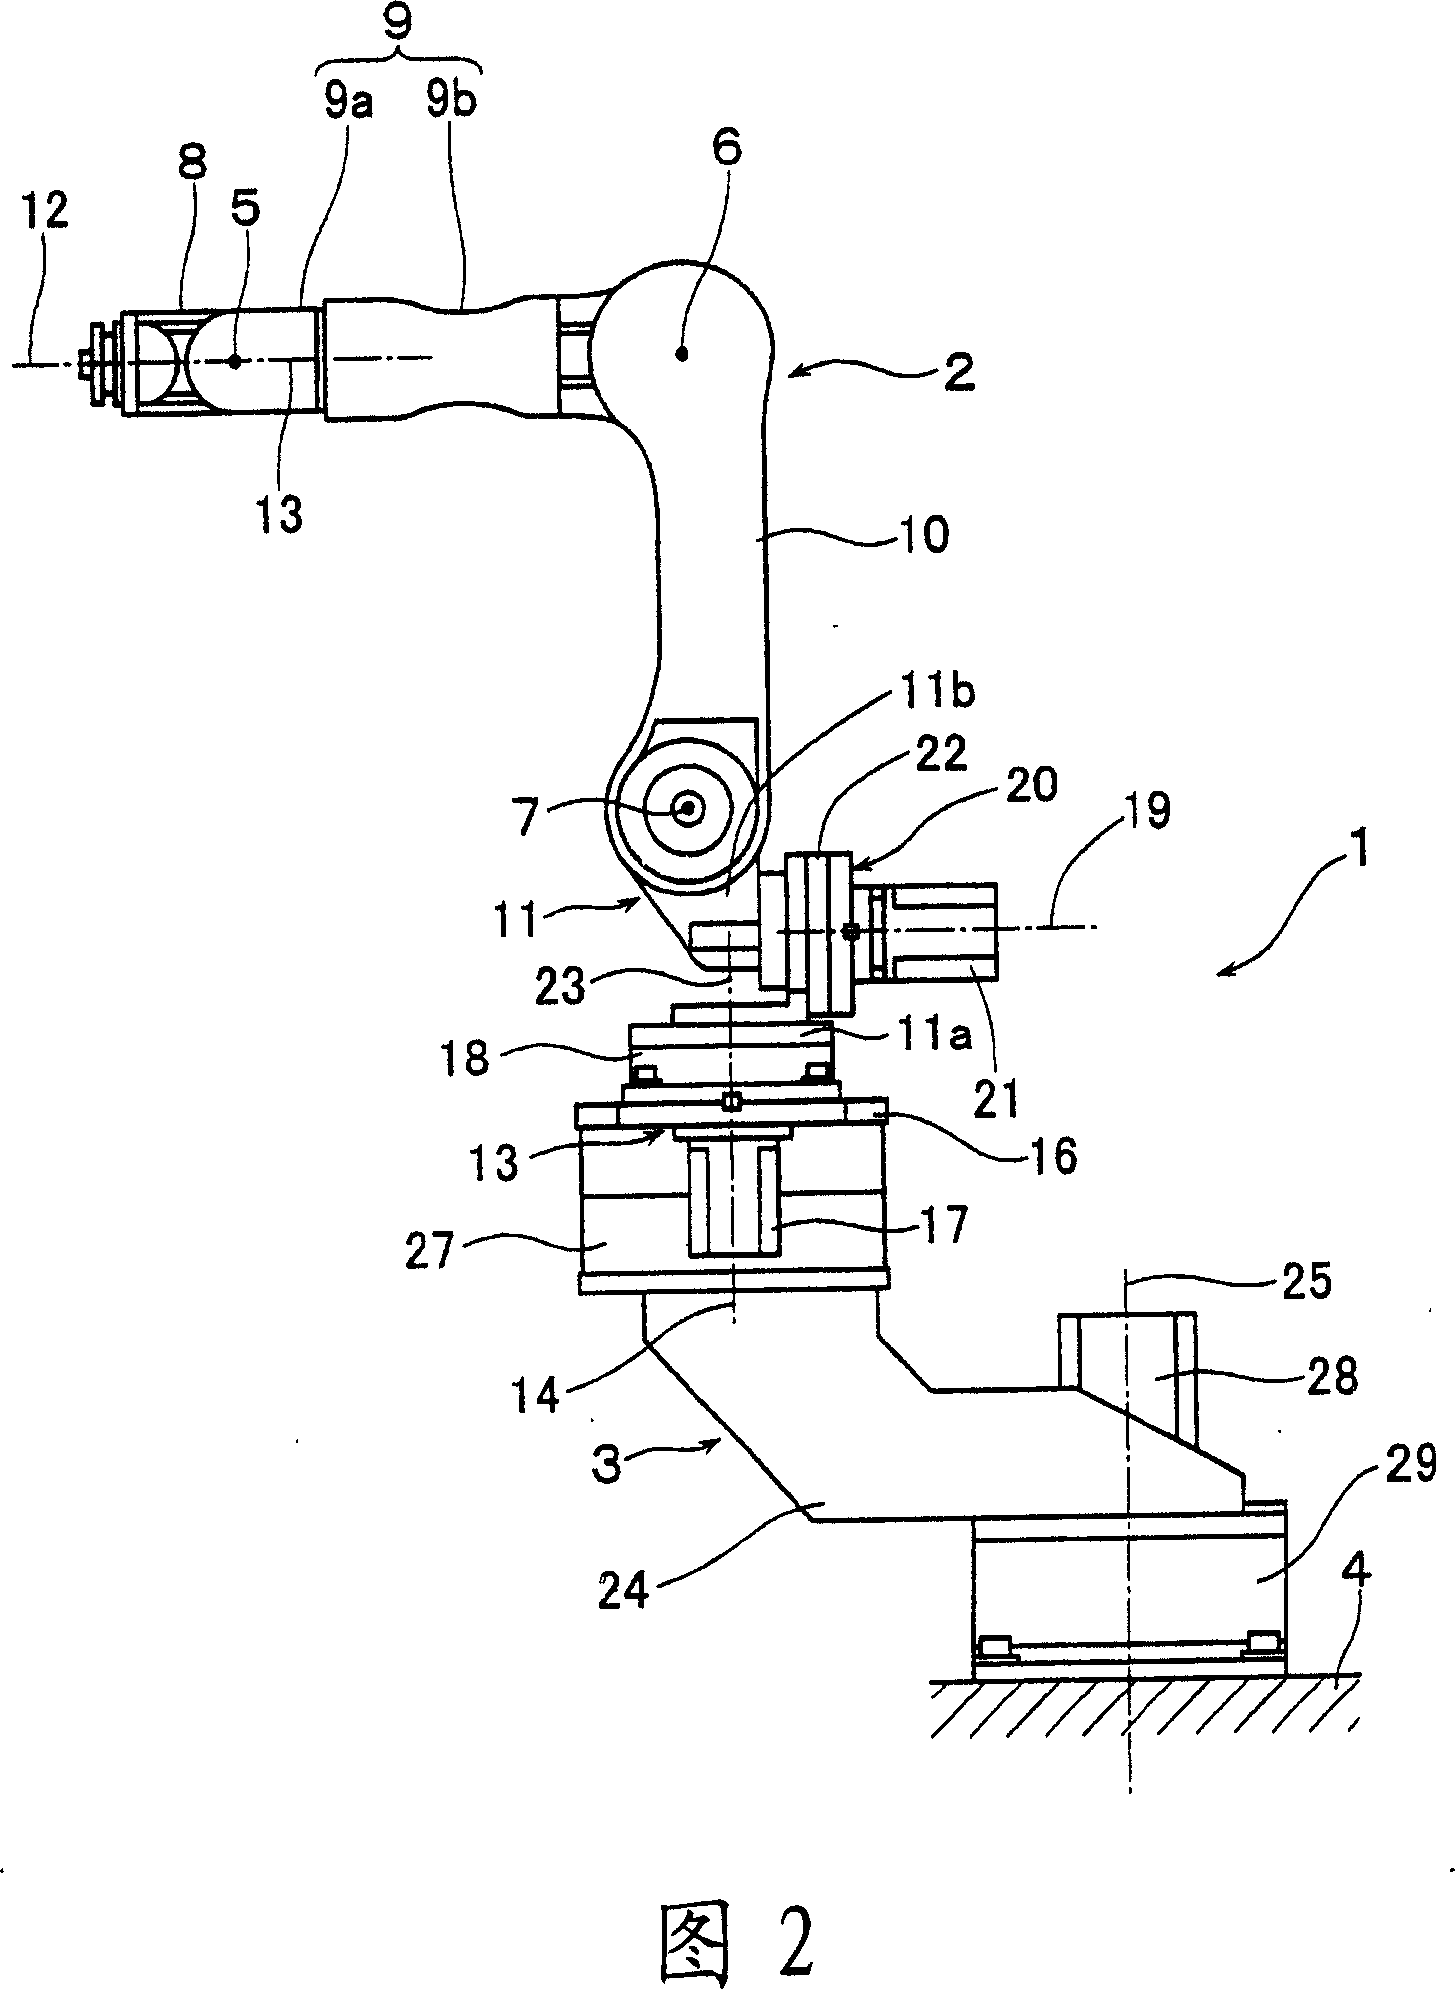 Processing and transferring apparatus